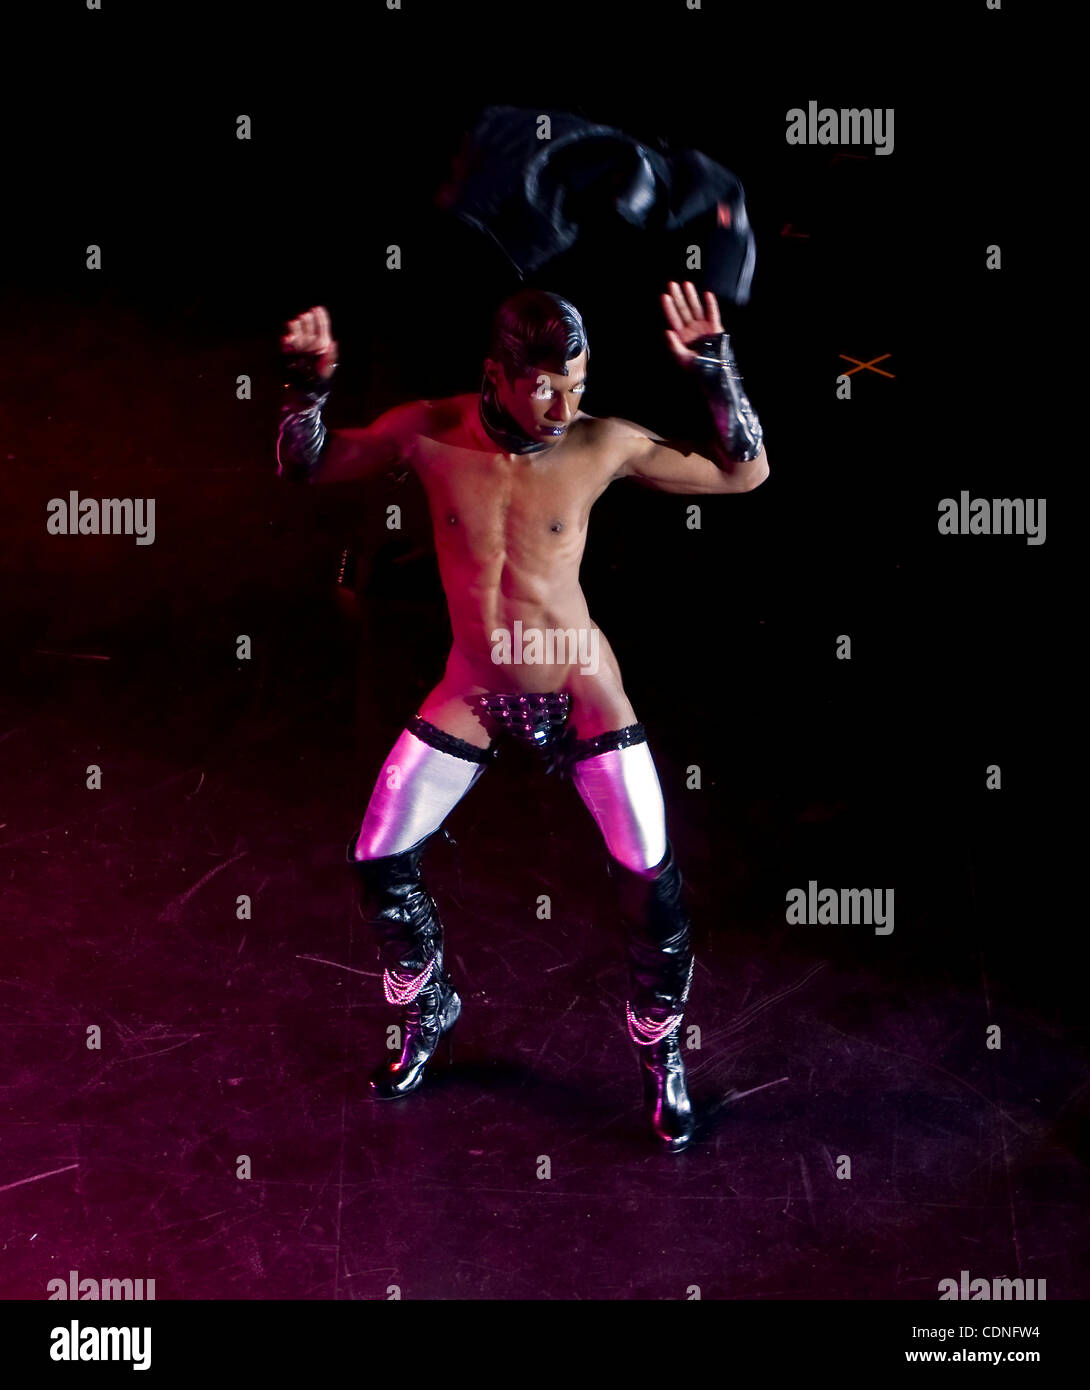 June 04, 2011 - Las Vegas, NV, USA -  Mahogany Storm competes in the Best Boylesque category during the Burlesque Hall of Fame Weekend.(Credit Image: © Brian Cahn/ZUMAPRESS.com) Stock Photo